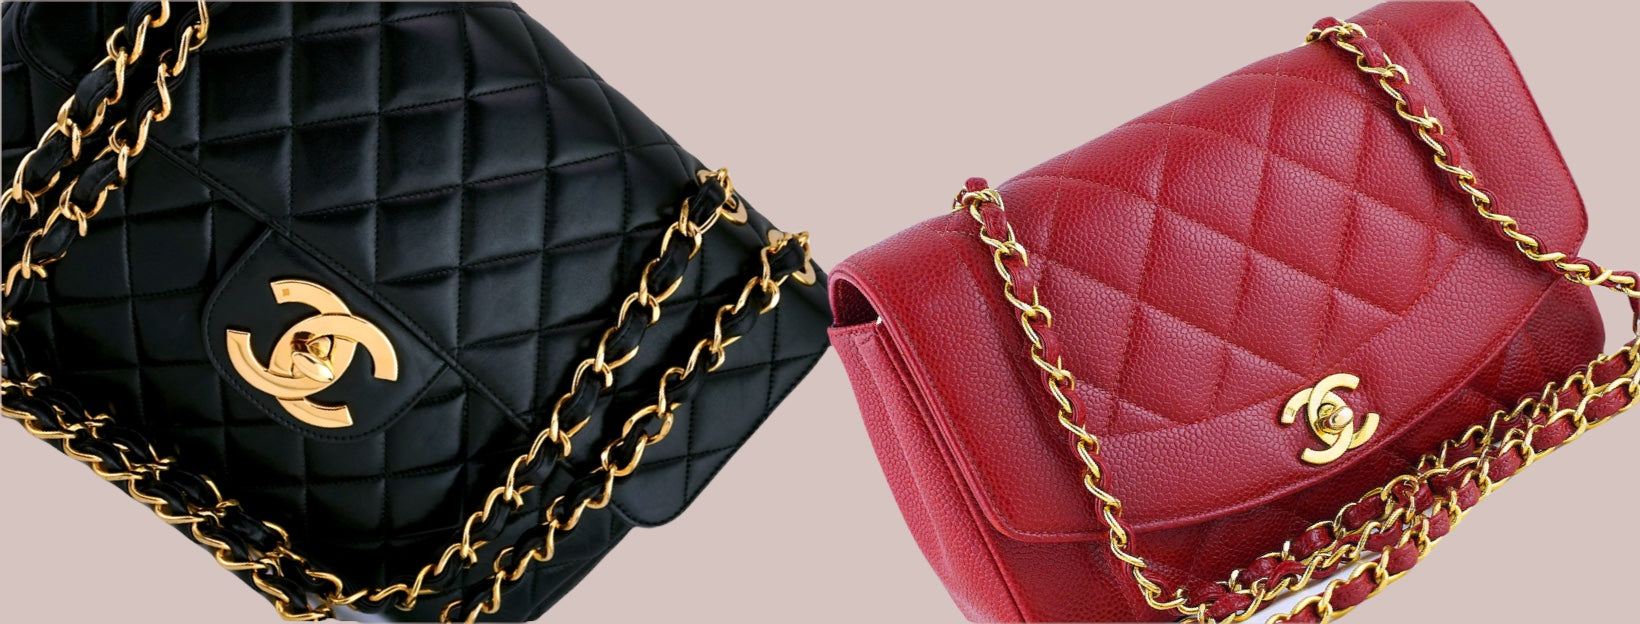 Chanel Handbags Investment or Not